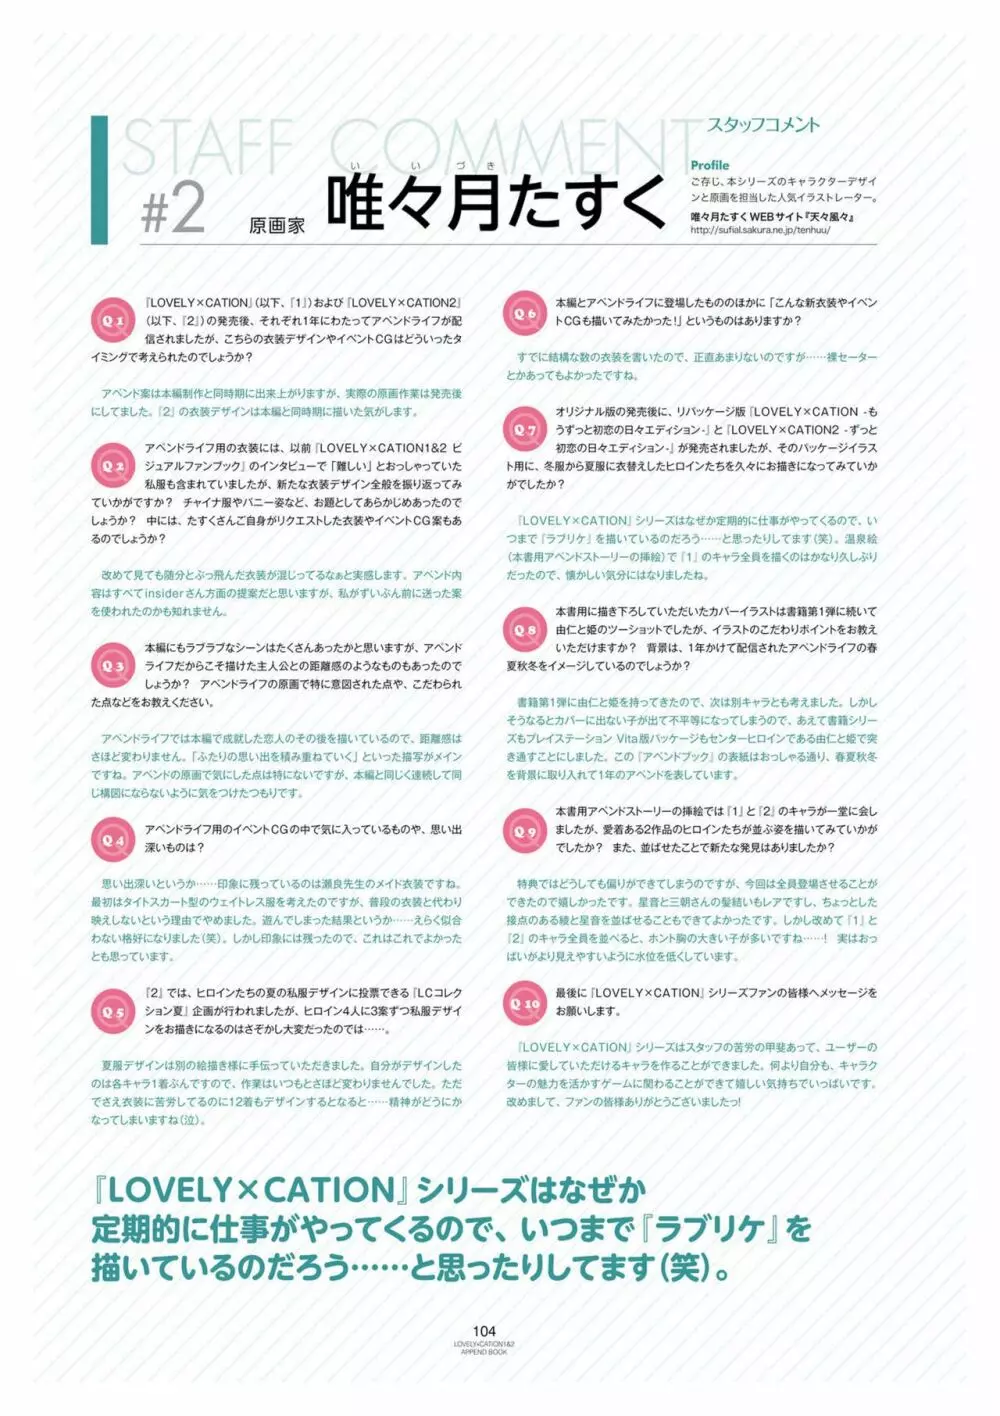 LOVELY×CATION1&2 アペンドブック 107ページ